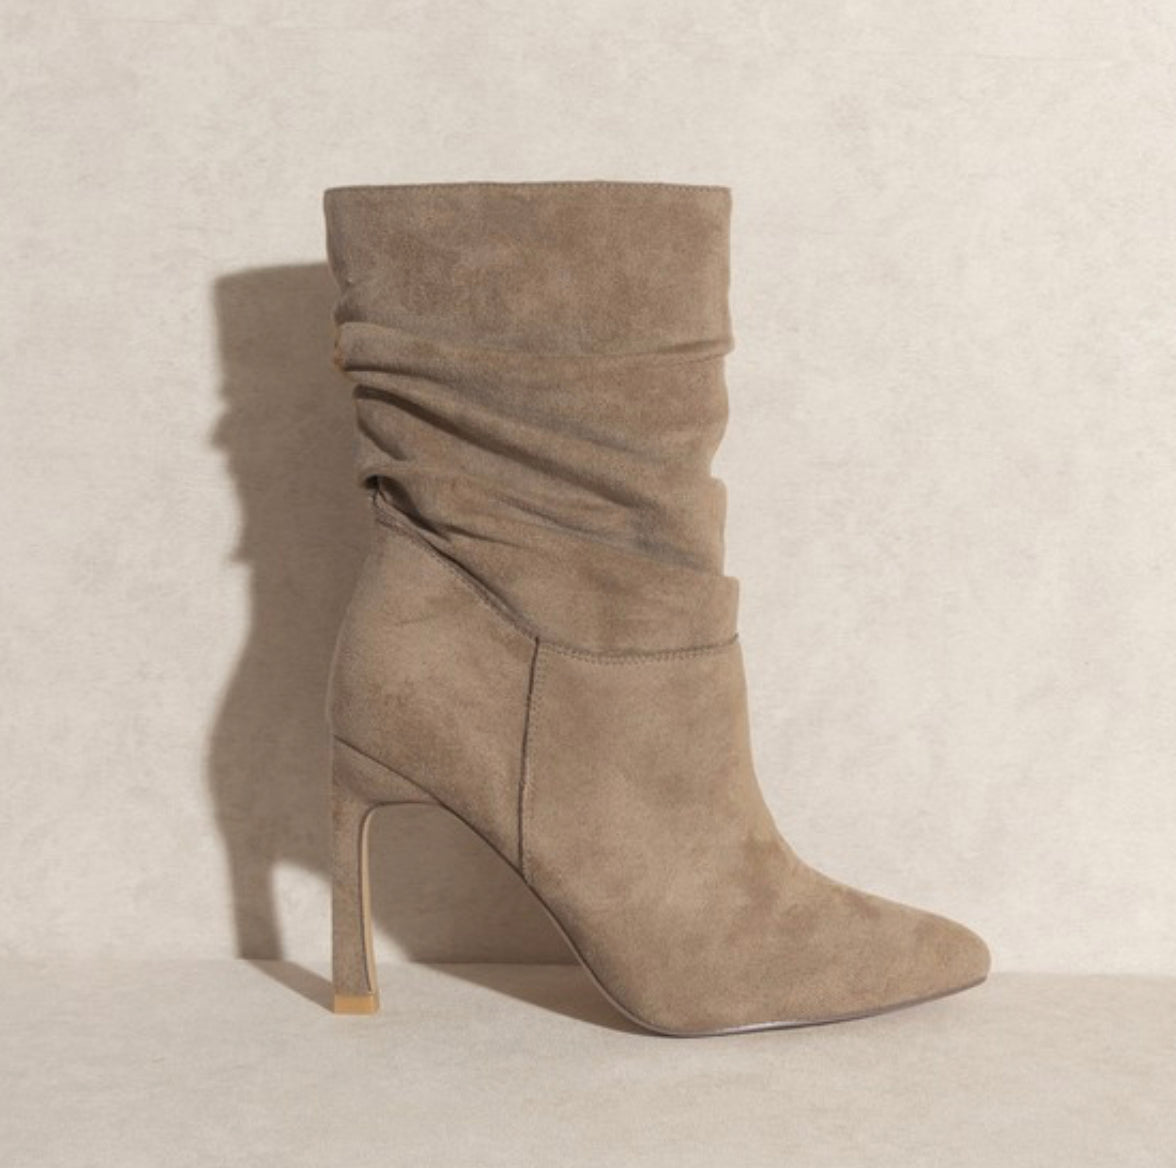 Slouchy Chic Boot